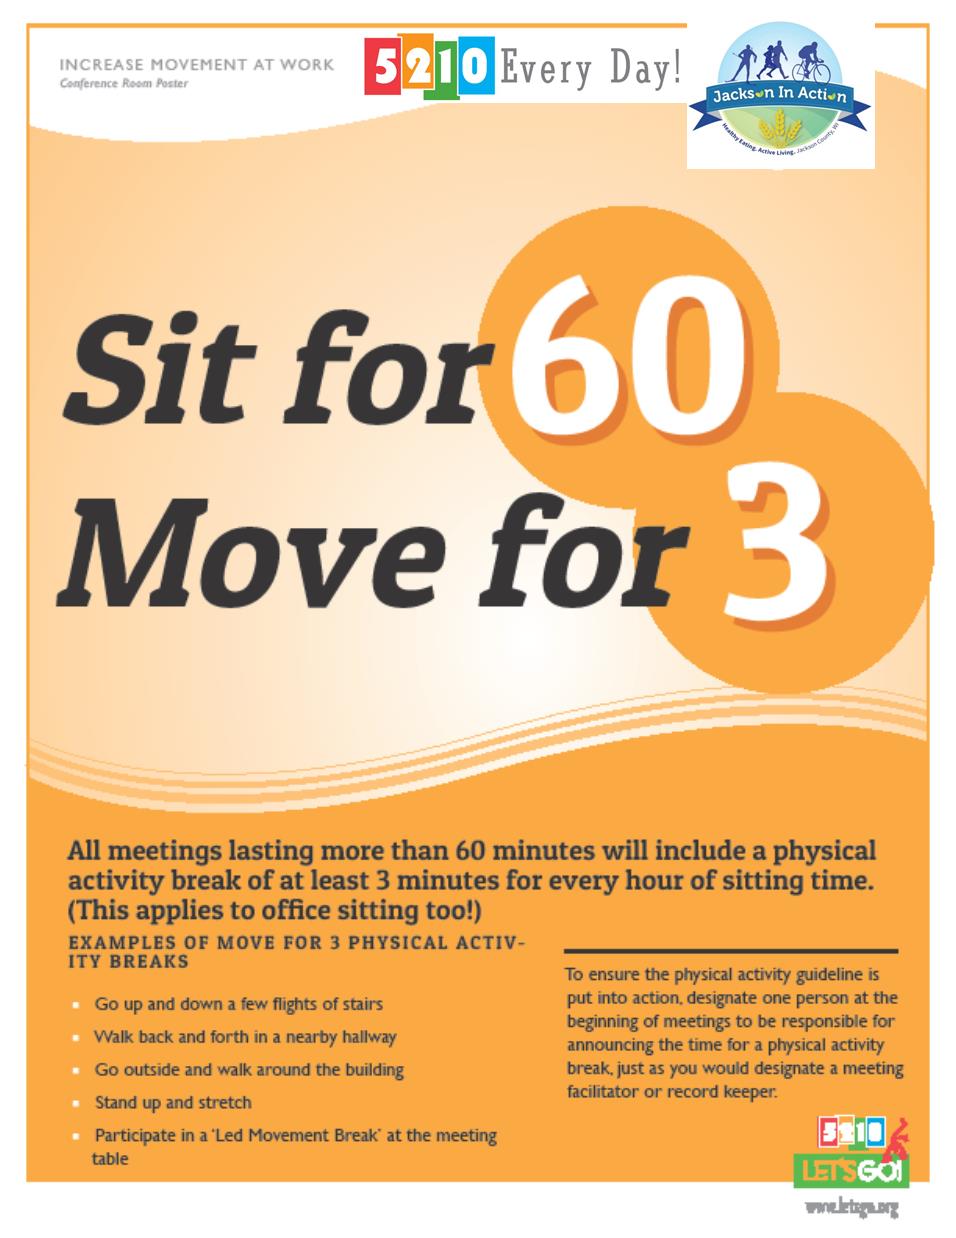 Sit for 60 Move for 3.jpg